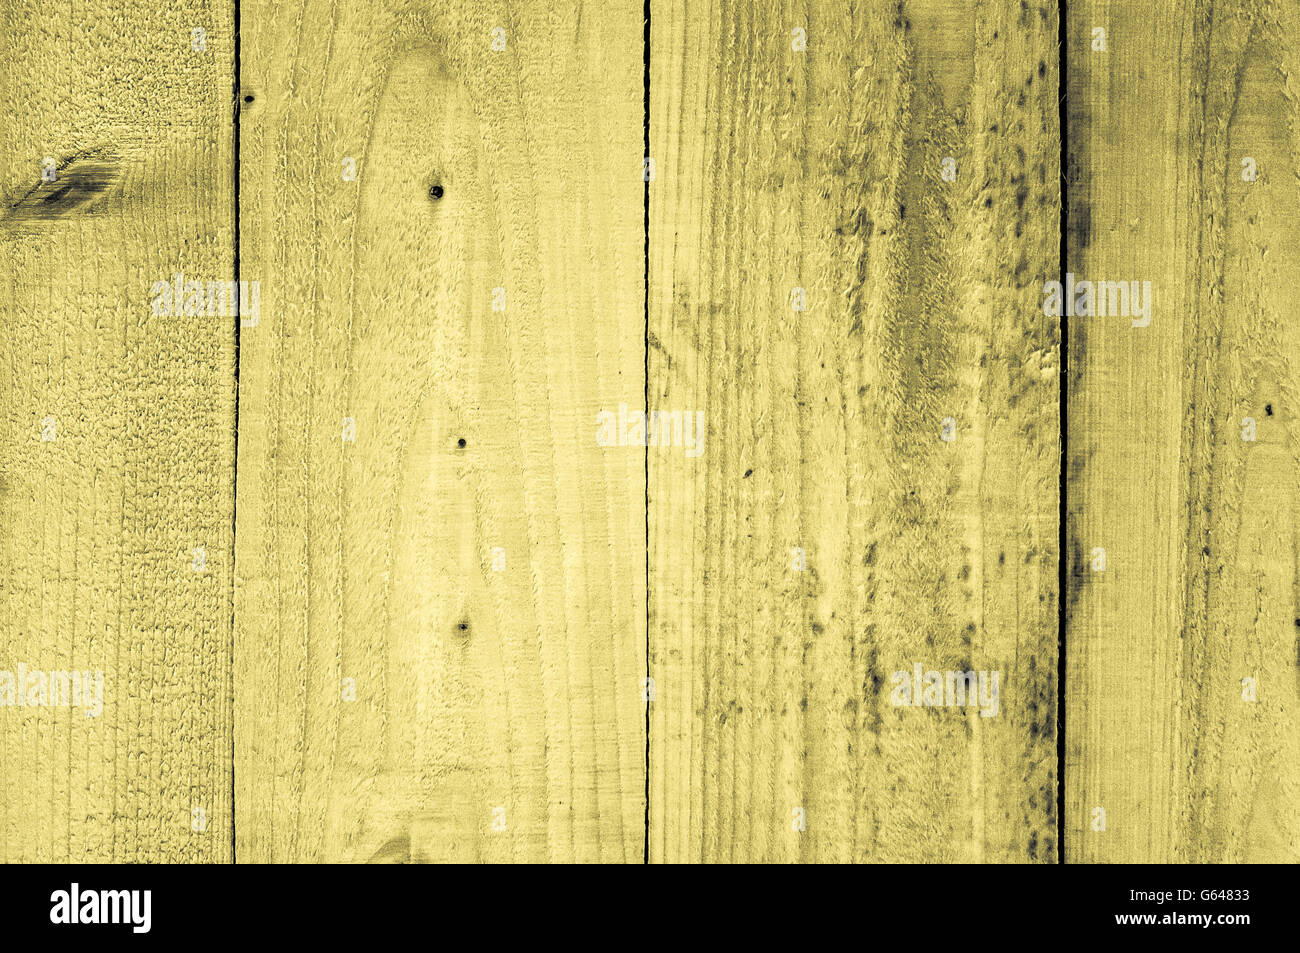 Excellent  style wood timber background of rough construction materials, technical materials in gray and yellow Stock Photo